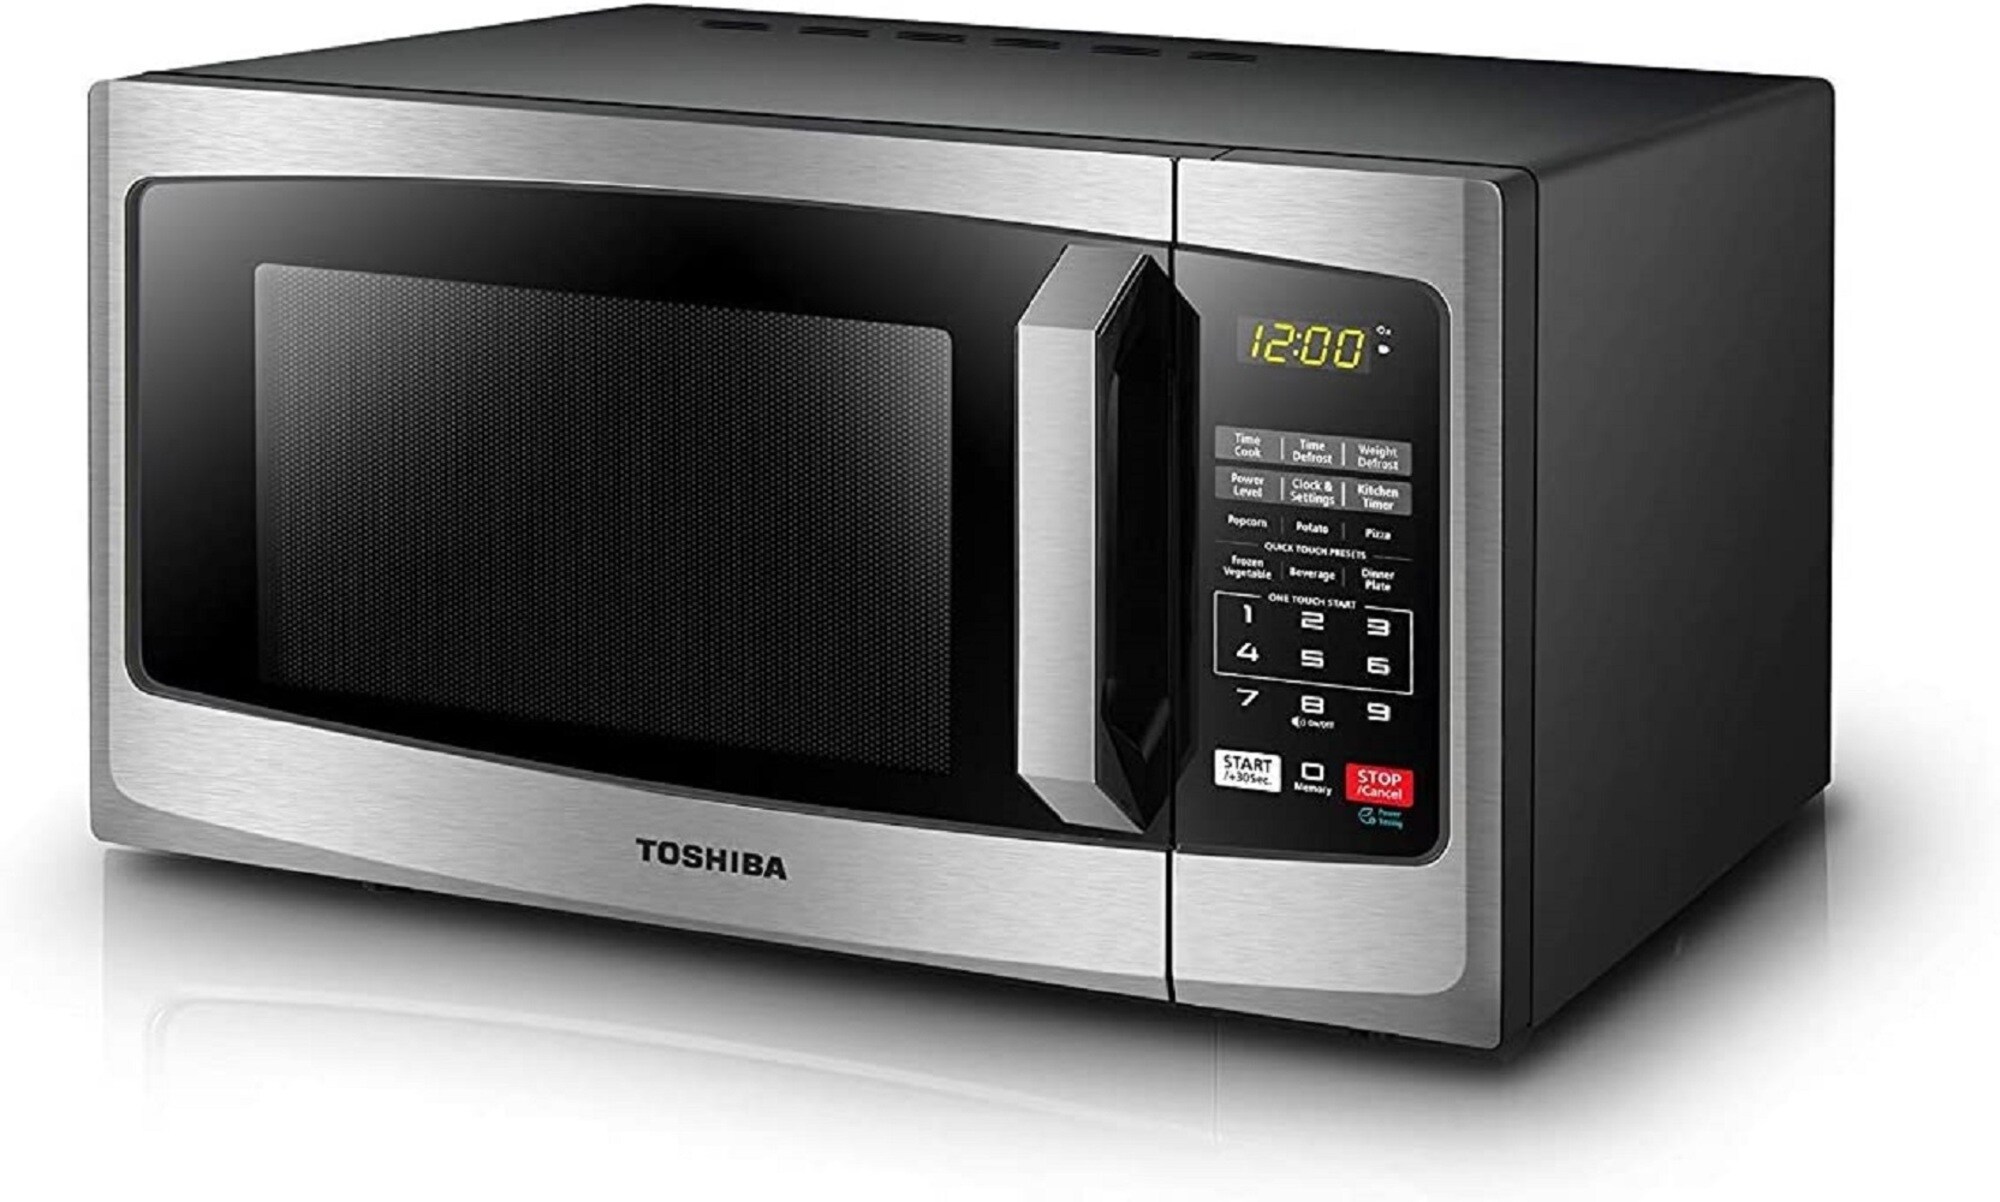 Farberware Countertop Microwave 900 Watts, 0.9 cu ft - Microwave Oven With  LED Lighting and Child Lock - Perfect for Apartments and Dorms - Easy Clean